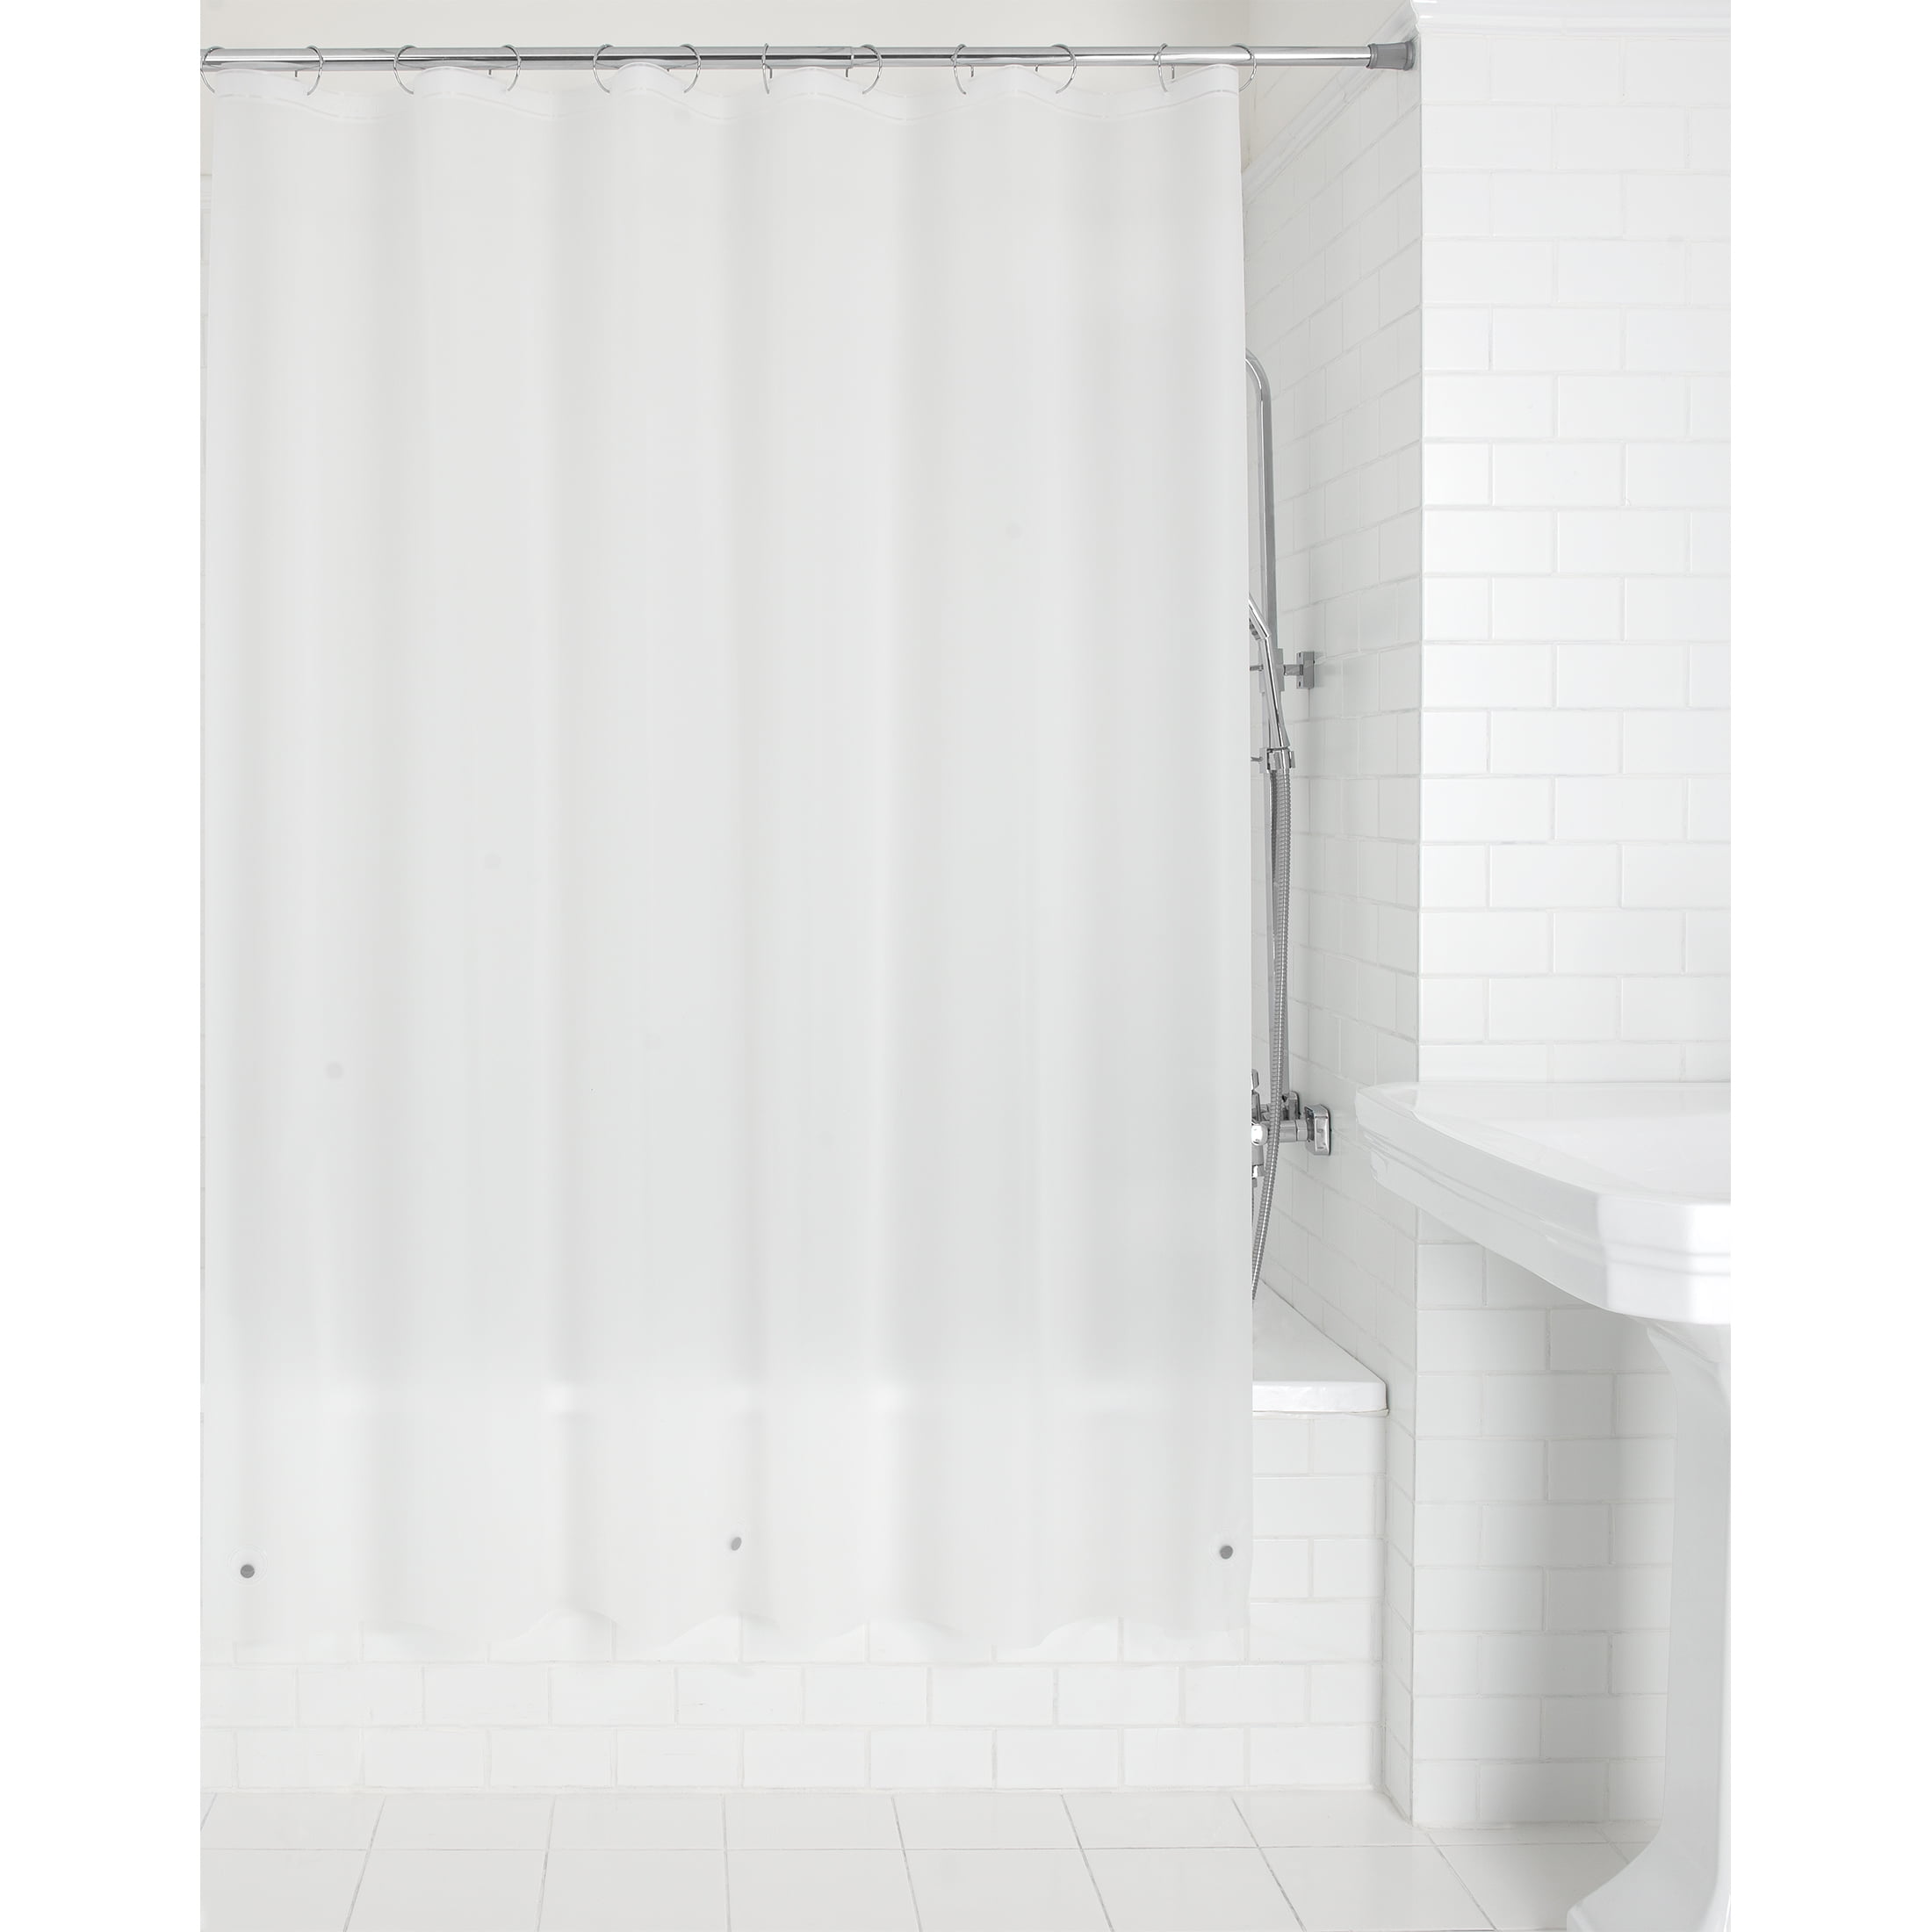 PEVA 3 Gauge Light Weight,Waterpro Details about   downluxe Frosted Shower Curtain Liner 72x72 